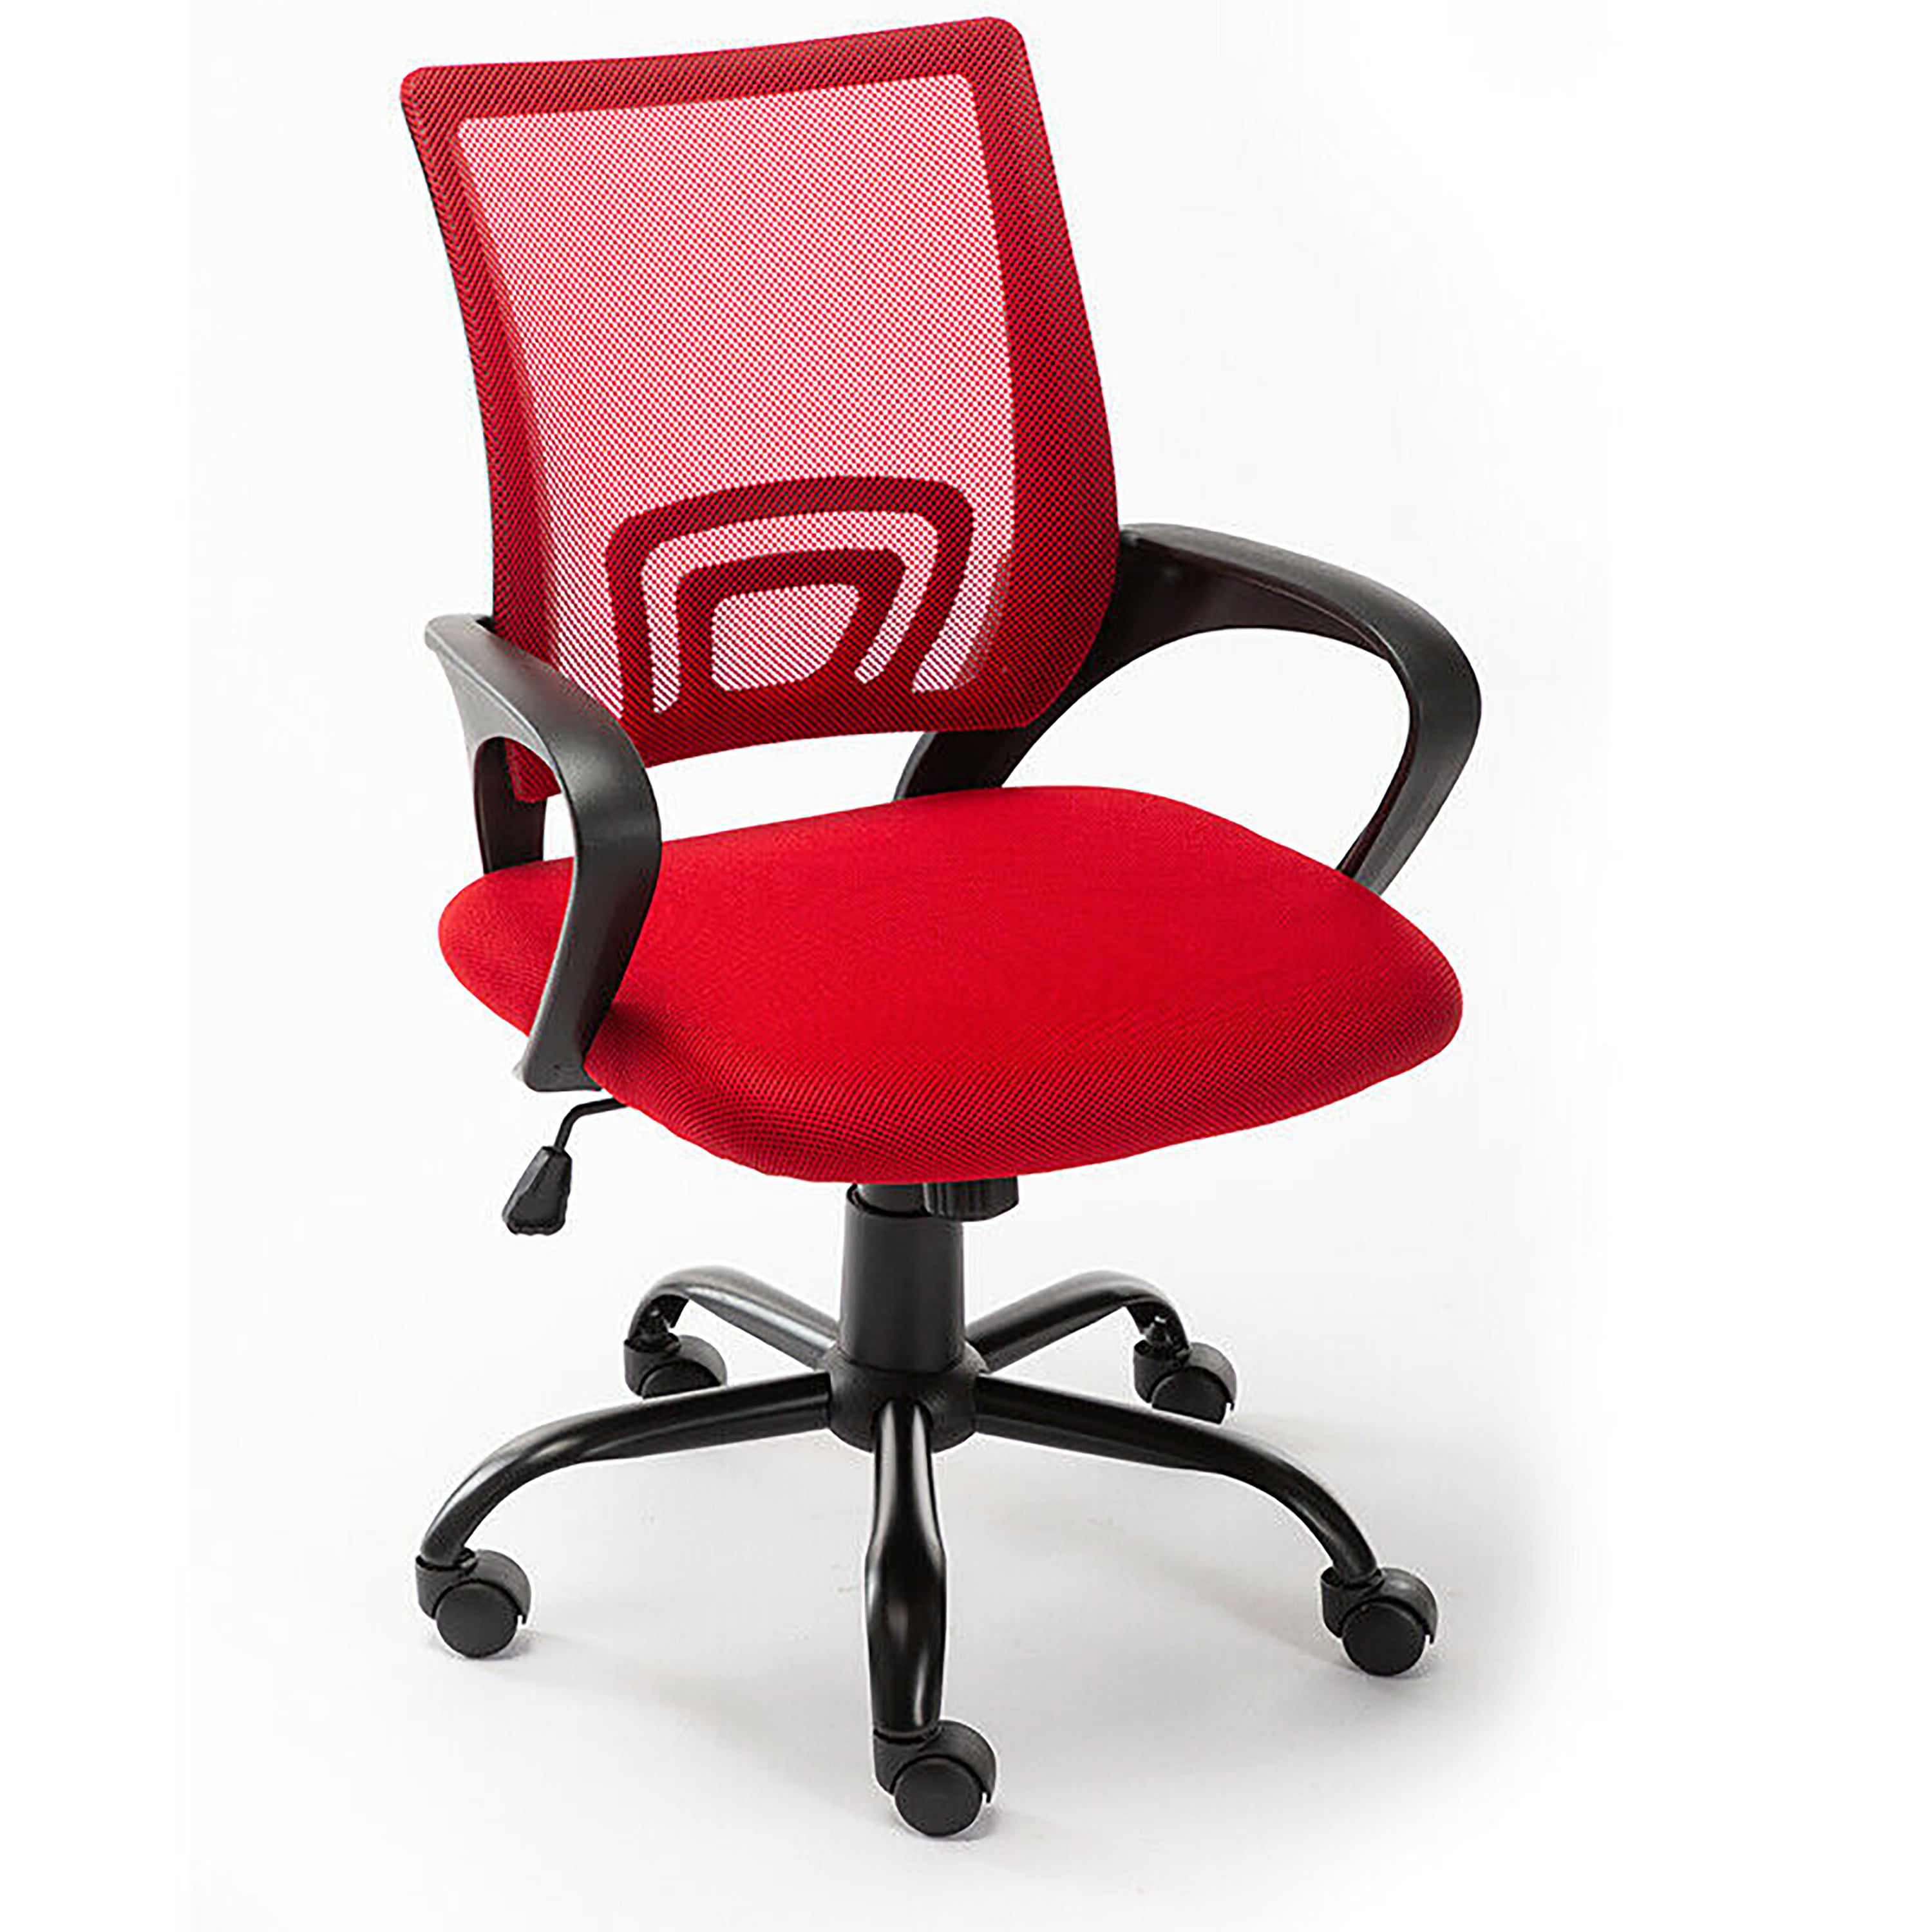 Details about   Computer Gaming Swivel Office Desk Chair Mesh High-back Ergonomic Lumbar Support 